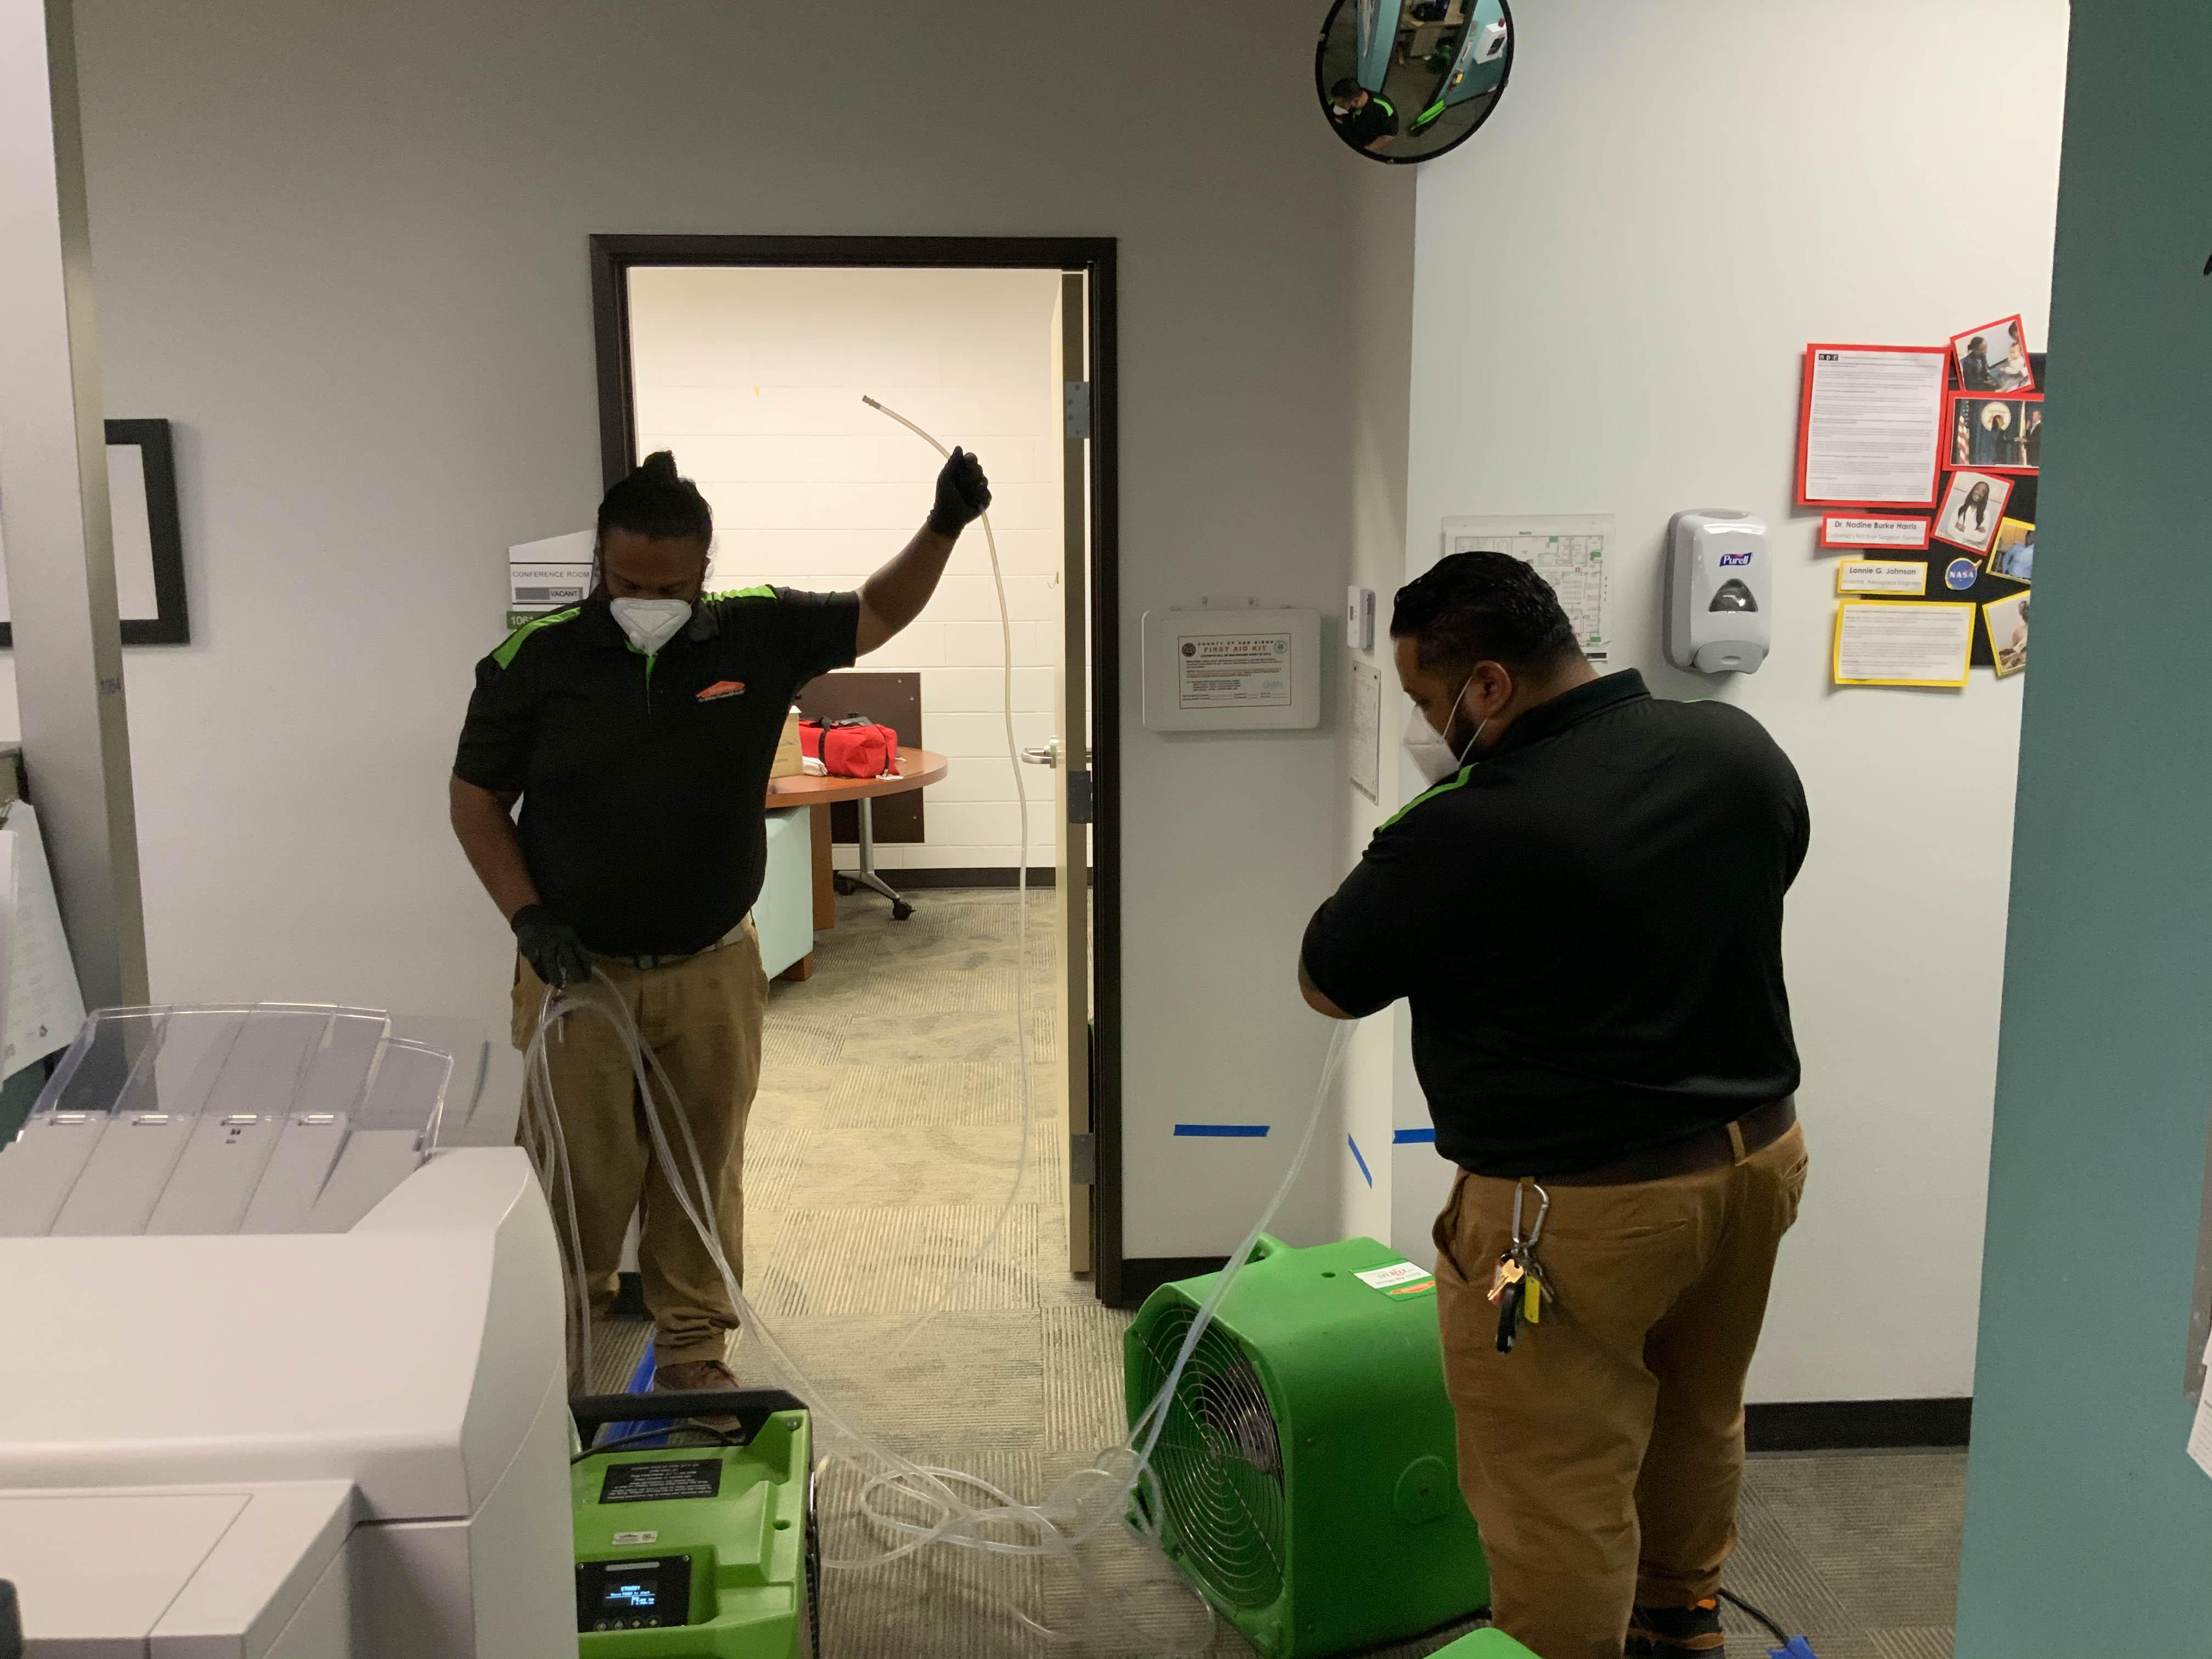 When it comes to water damage, you can trust the pros at SERVPRO of San Diego East to take care of your property in Santee, CA. We are ready to serve you!